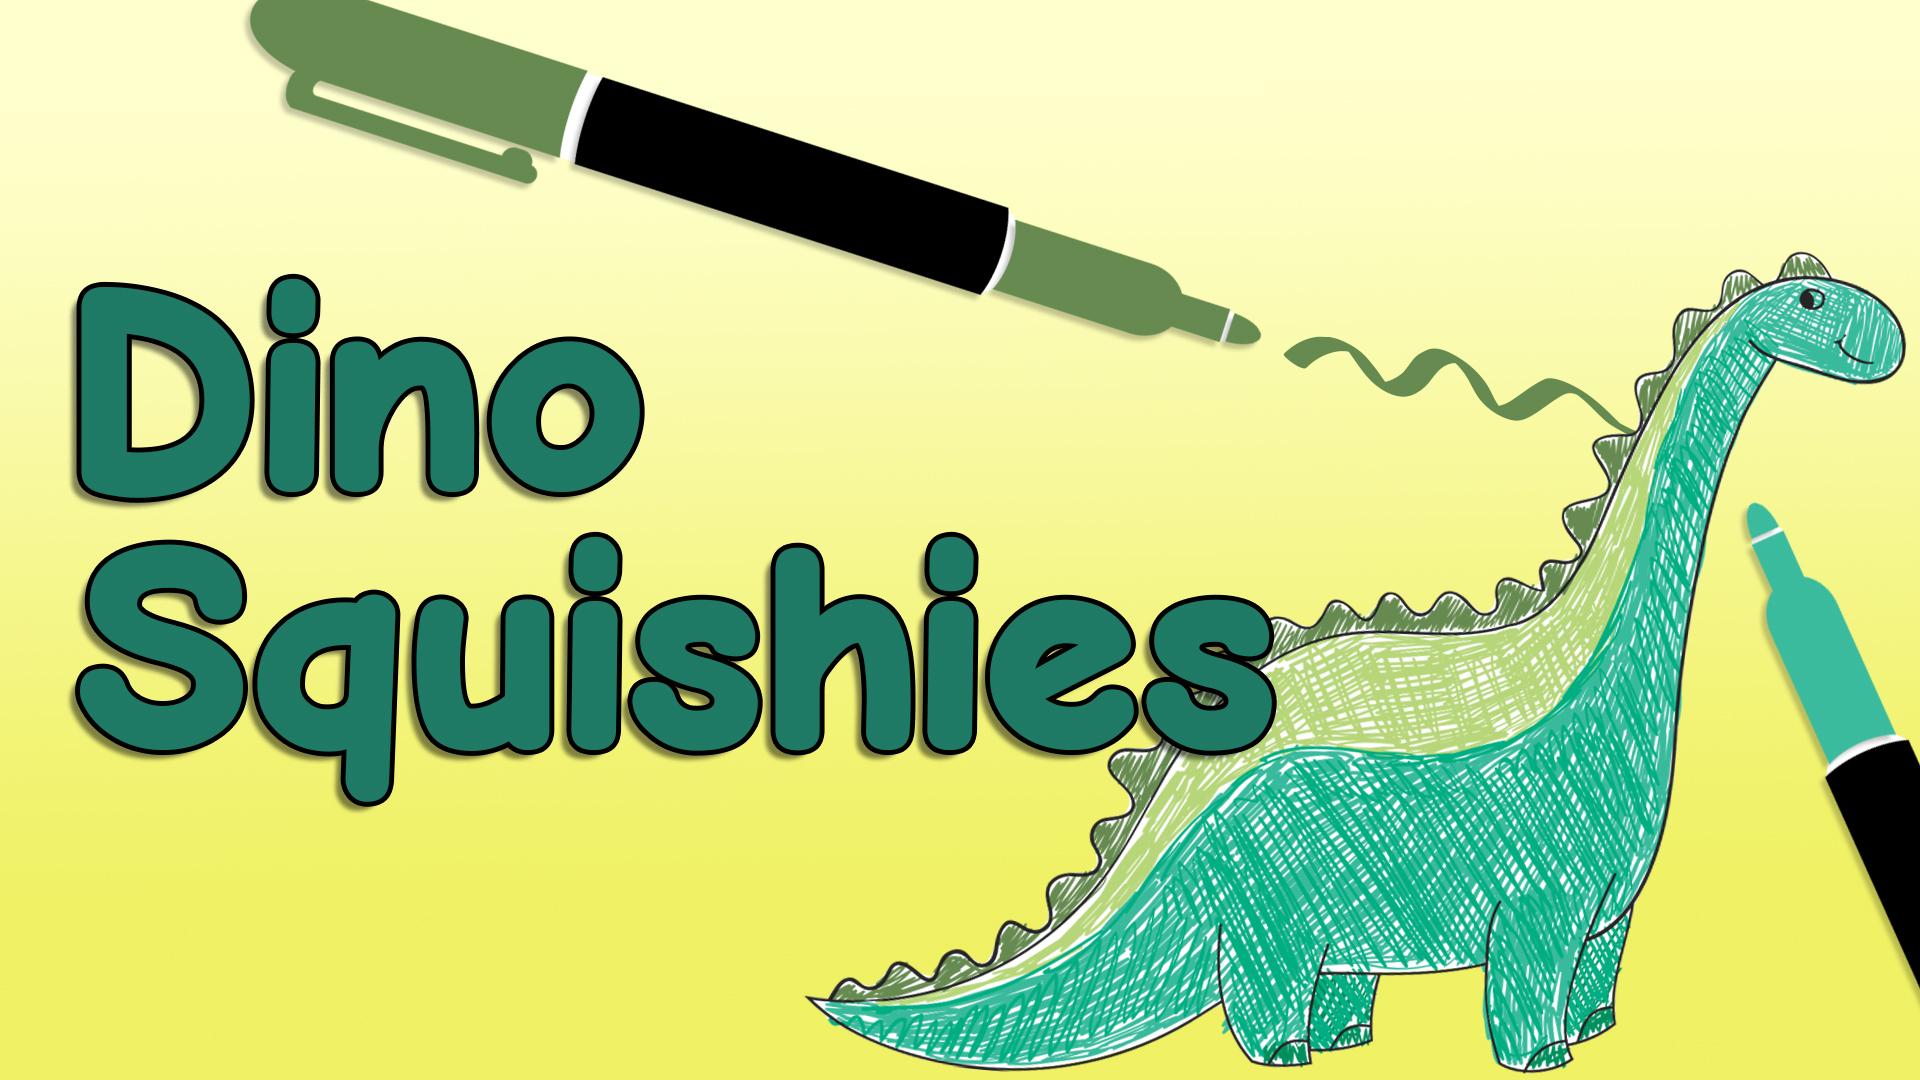 Image reads "Dino Squishies" against a yellow gradient background. A dinosaur being colored with permanent marker is to the right of the title. Two permanent markers are pointed towards the dinosaur. 